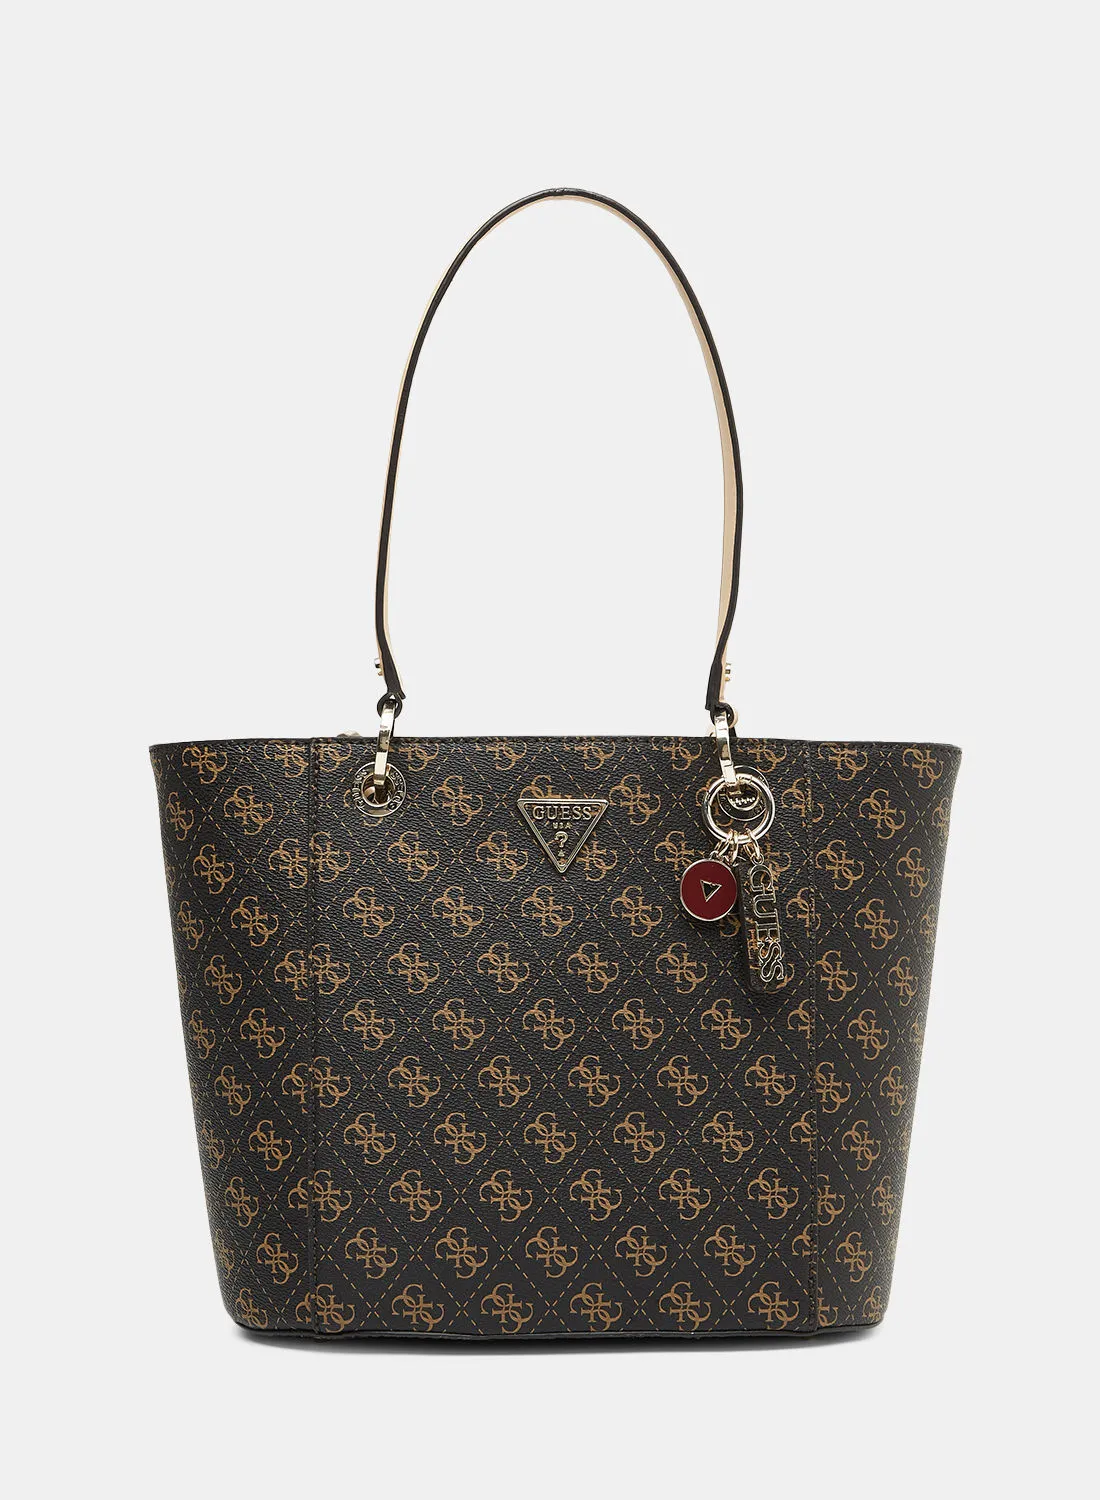 GUESS Noelle Small Elite Tote Bag